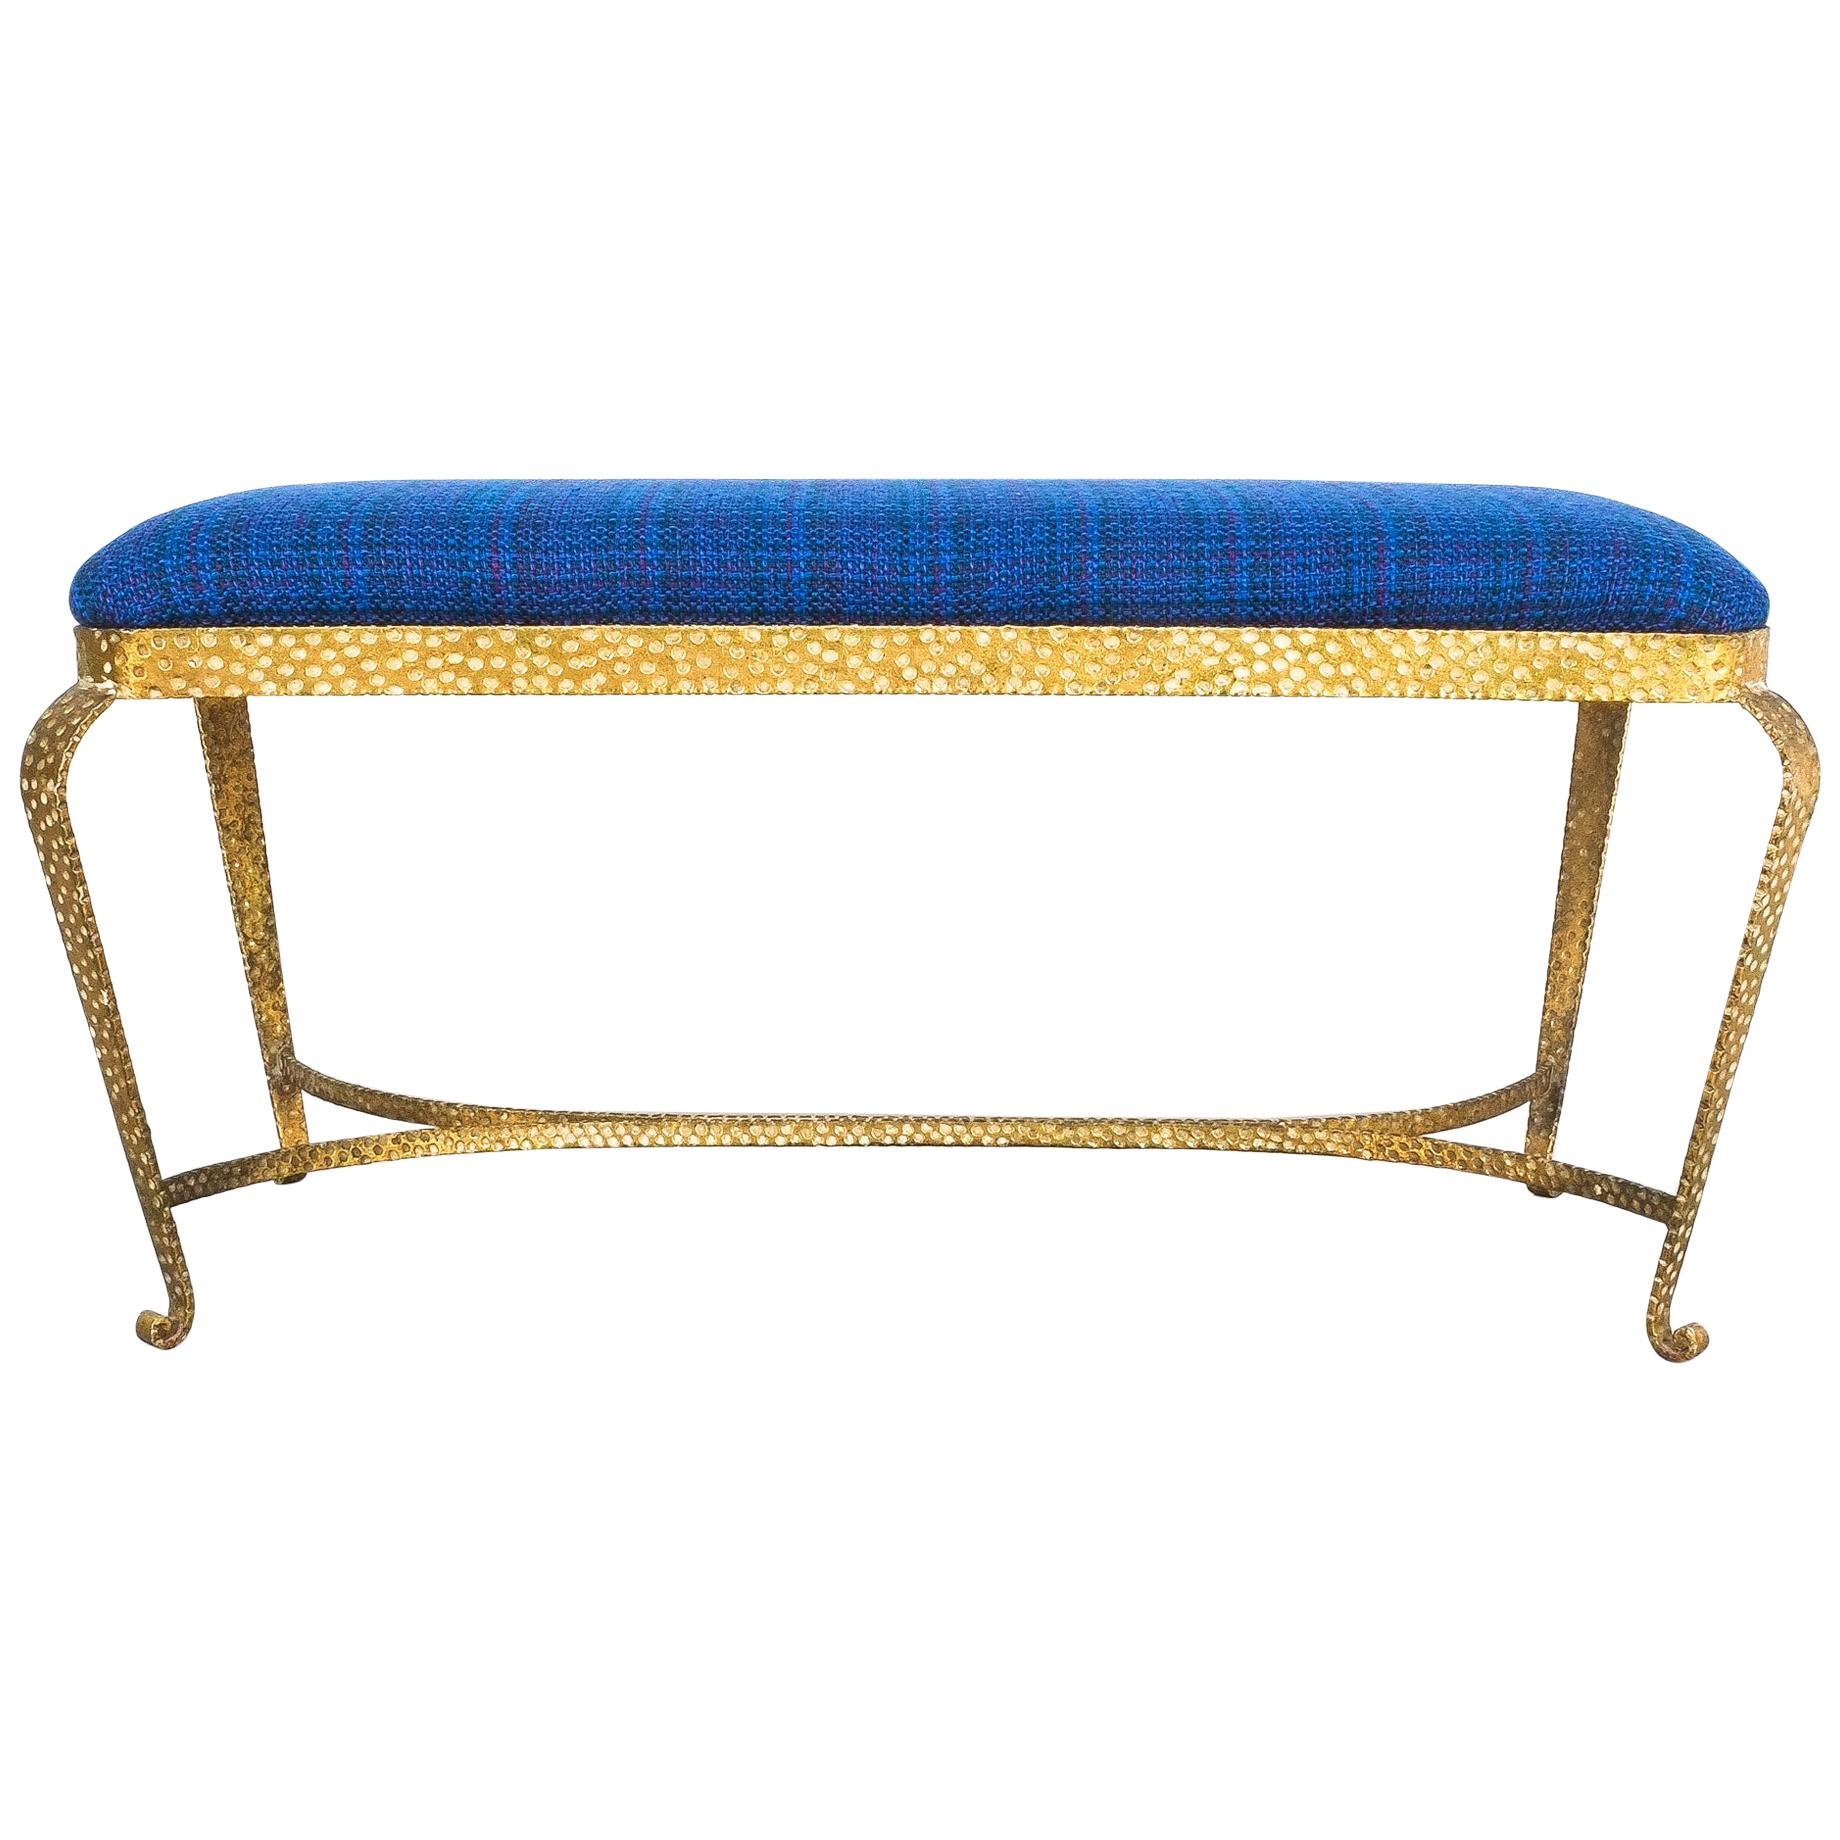 Large Gold Pier Luigi Colli Iron Bedroom Bench in Blue Fabric, Italy, 1950